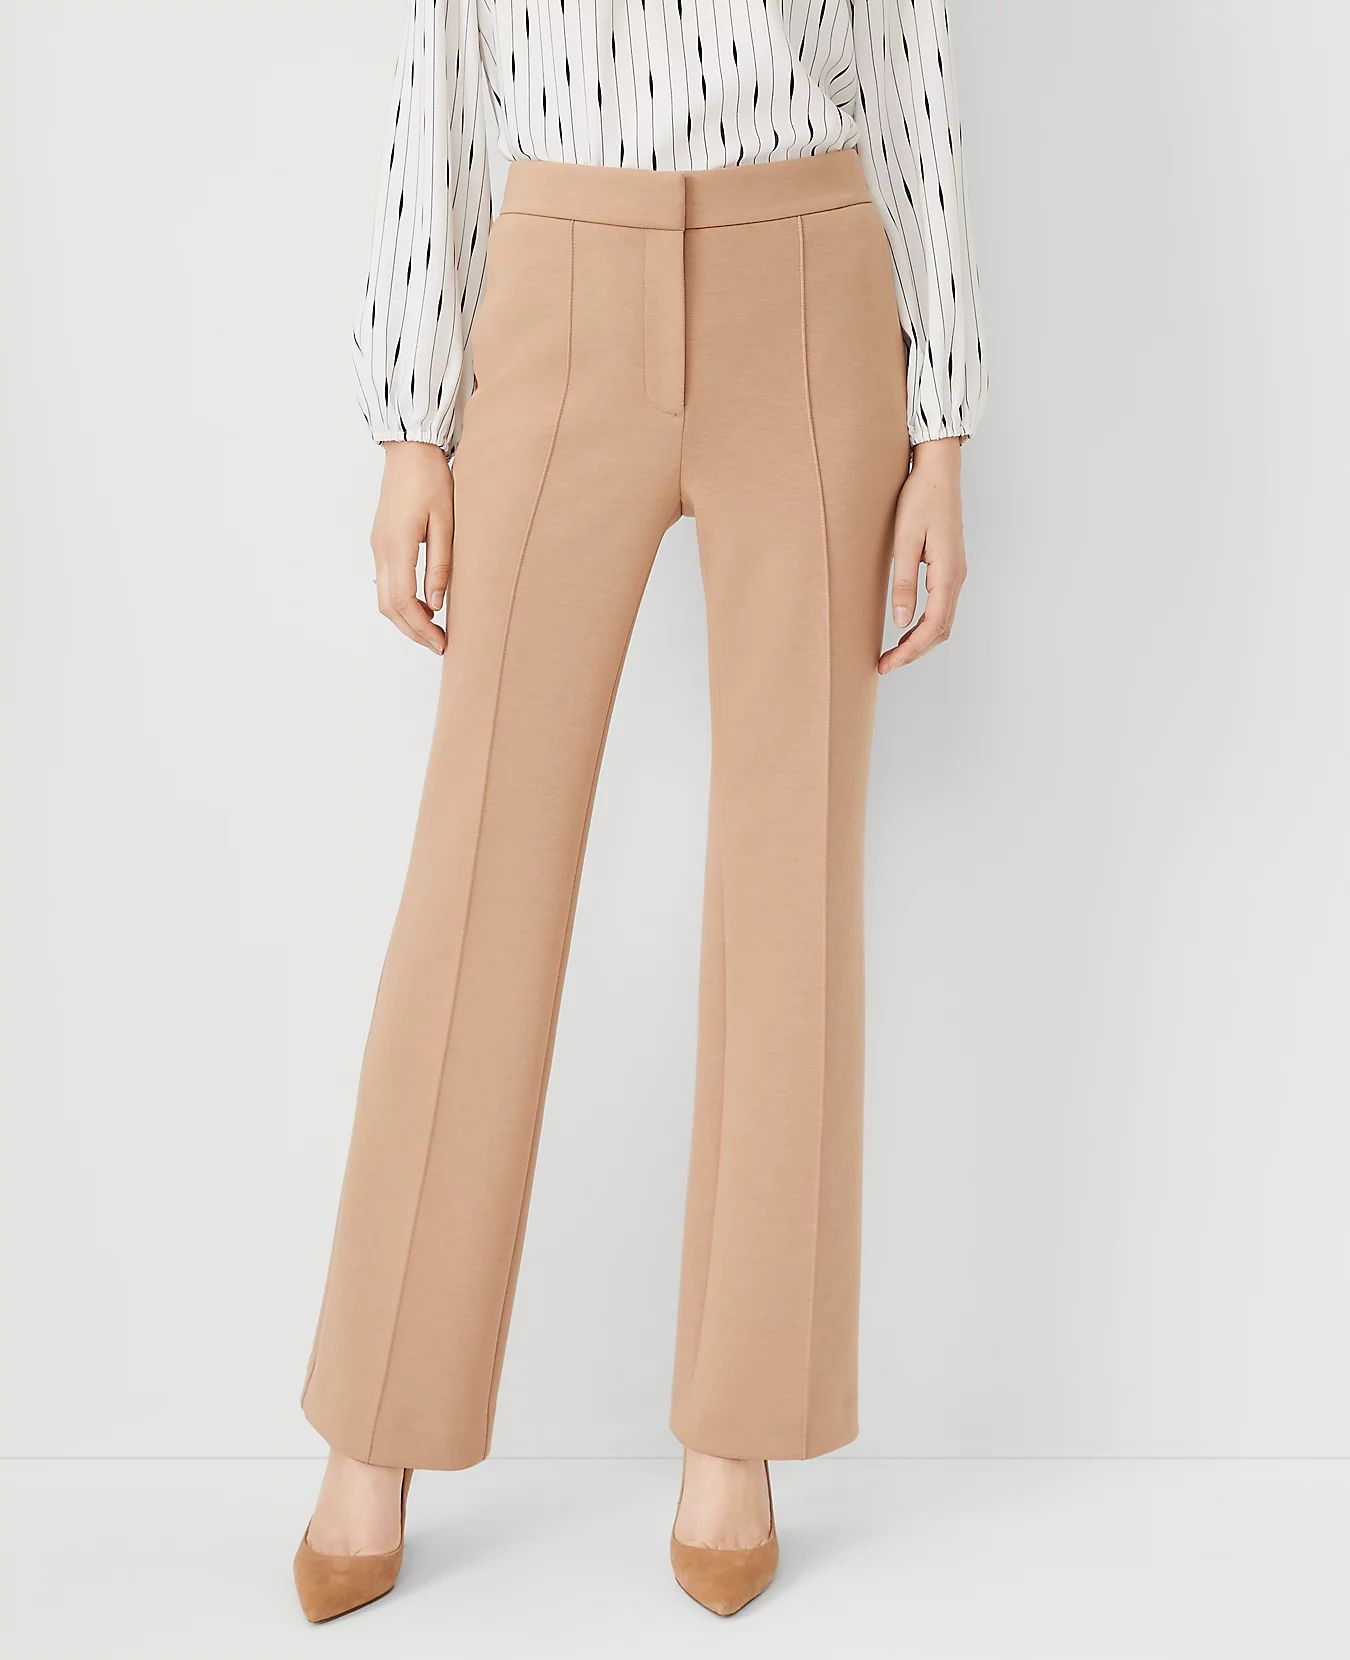 The Pintucked High Waist Trouser Pant in Double Knit | Ann Taylor (US)